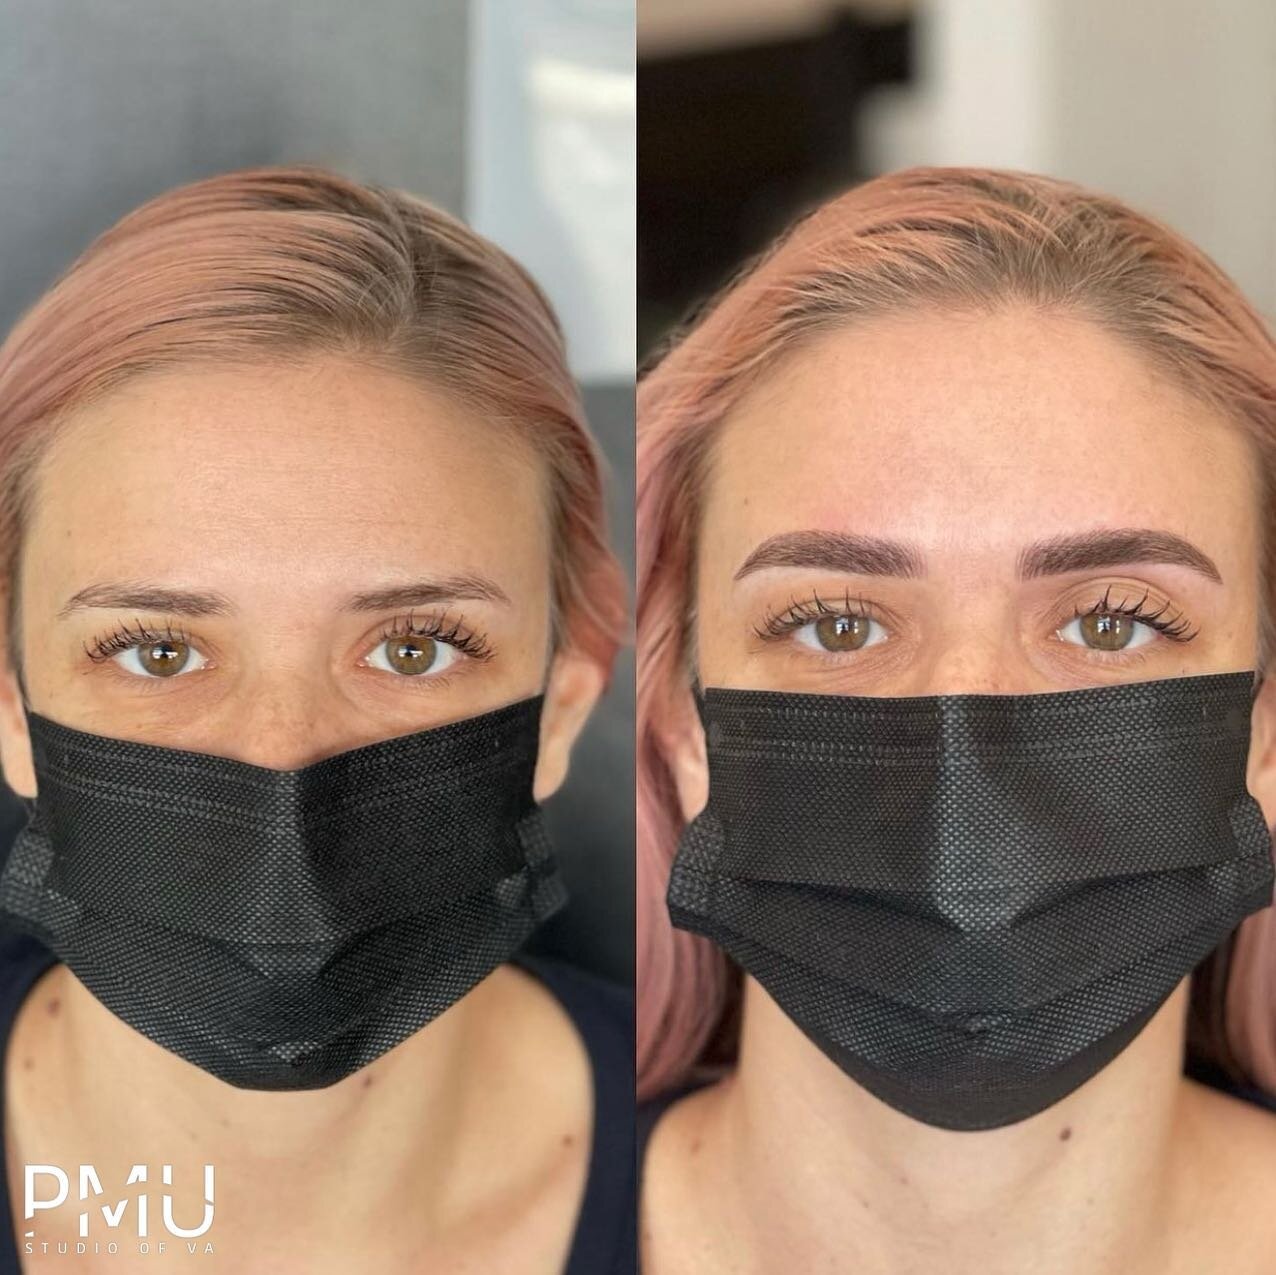 More beautiful brow work by our newest artist Kristal. 😍

Sometimes you just need fresh new brows to brighten up your face and to lift your entire look. Fuller, fluffier and still oh so naturale. 😀

Kristal&rsquo;s intro rates are over 50% off and 